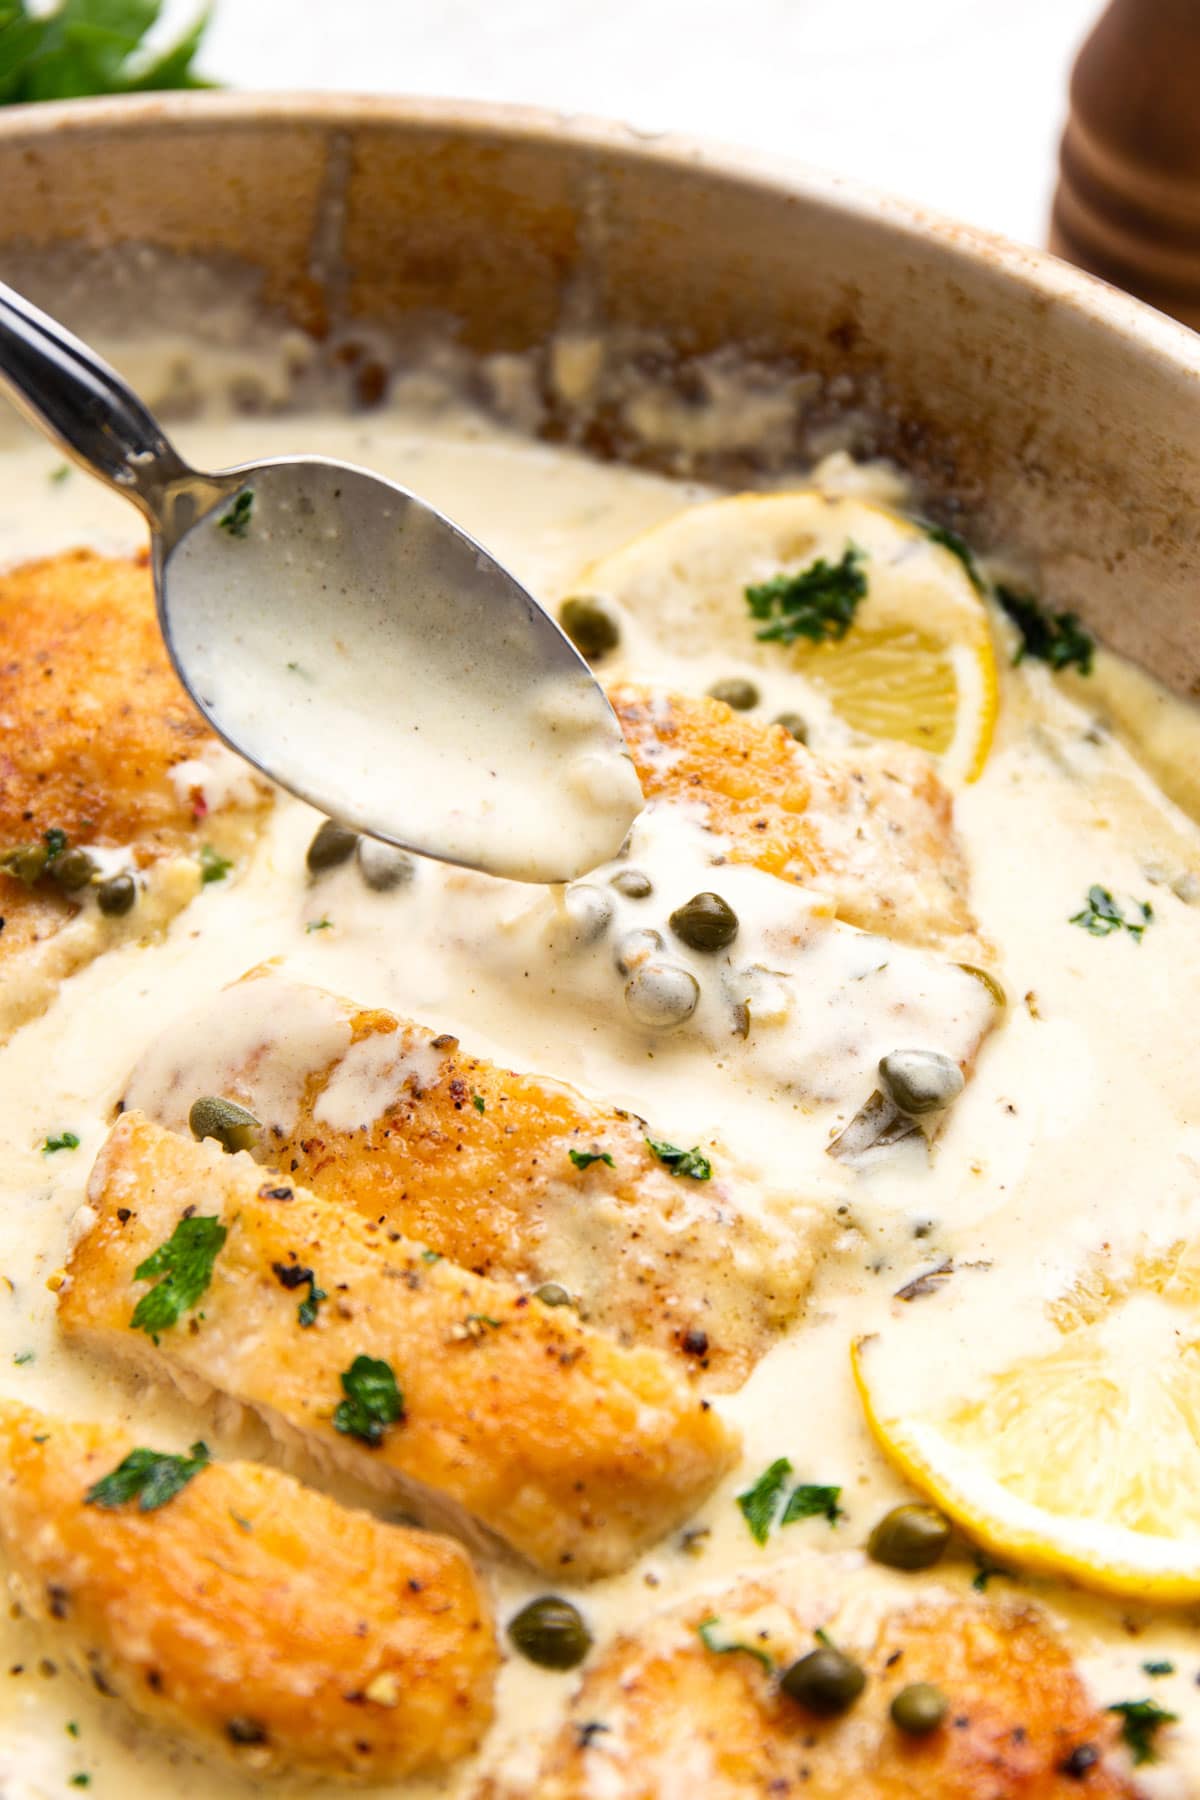 Some cream sauce spooned over the lightly battered creamy lemon chicken piccata.